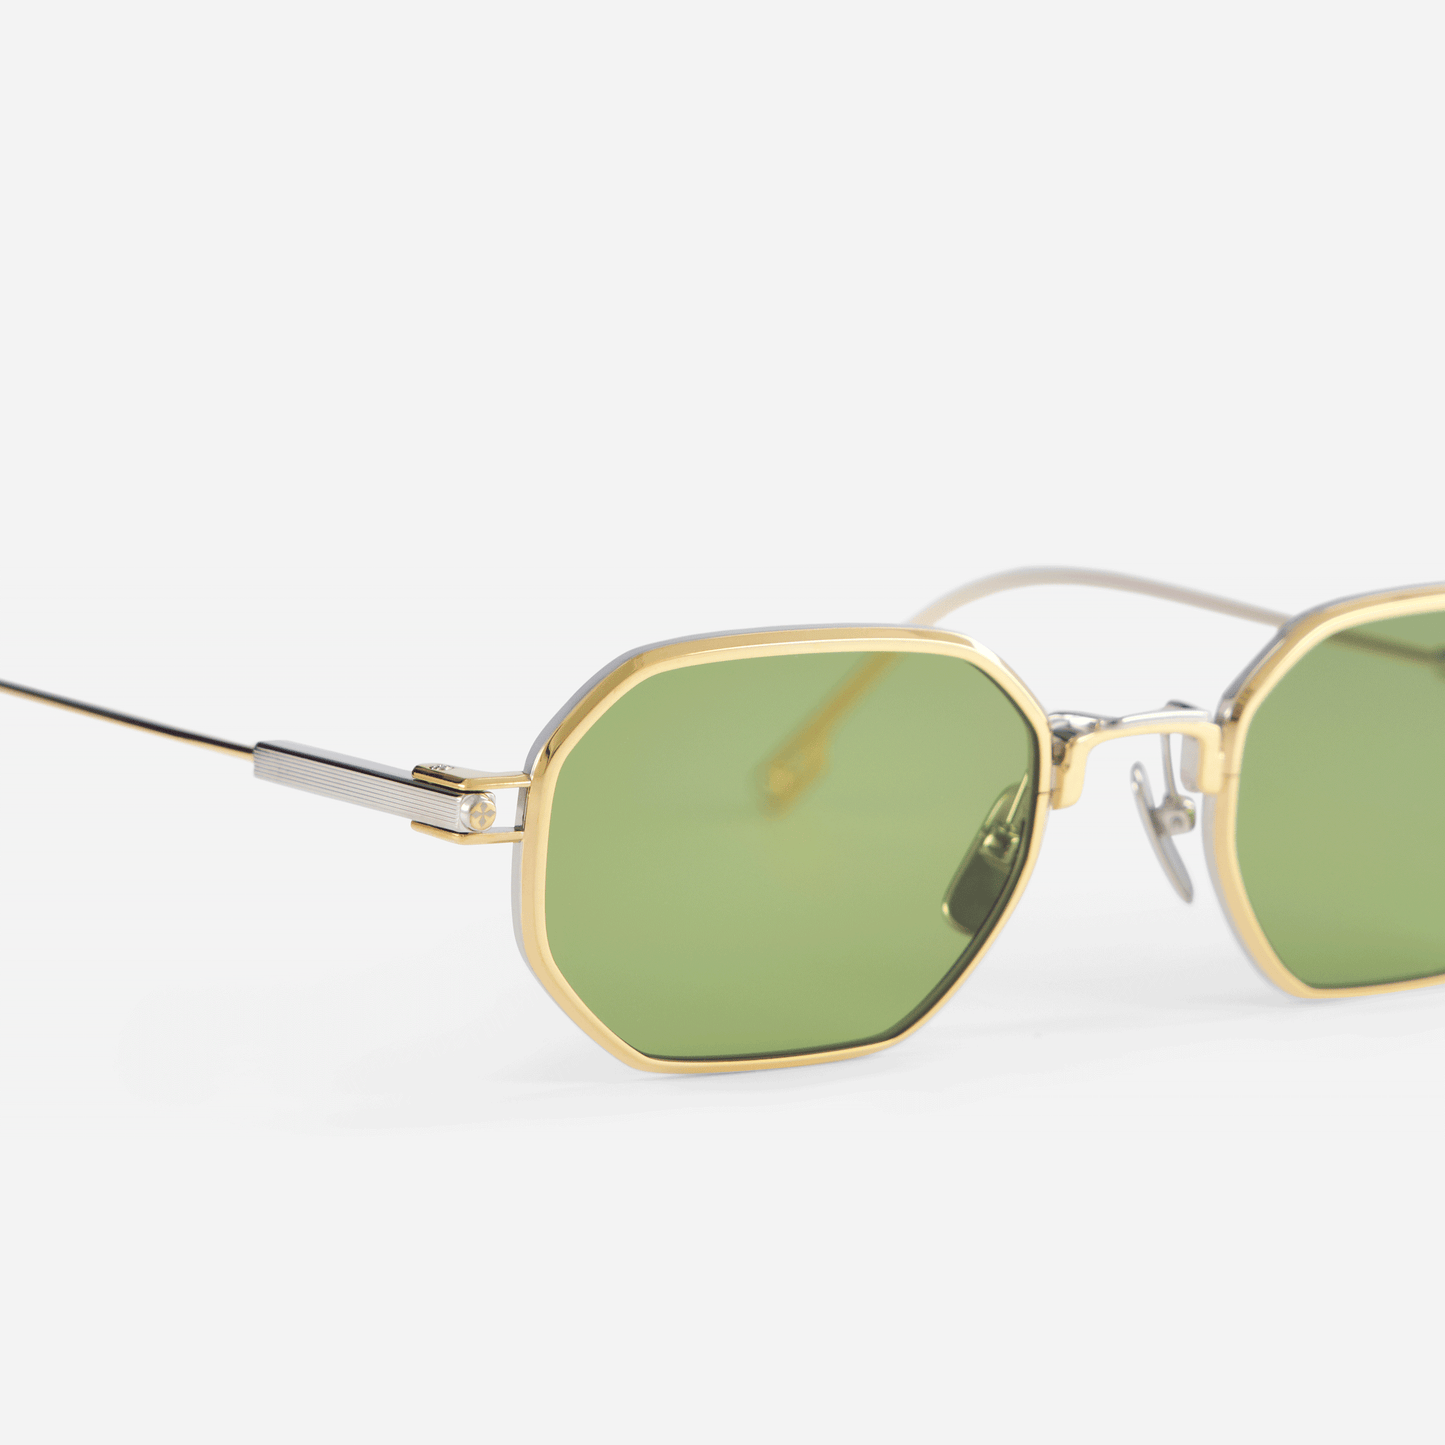 Timir S502 hexagonal glasses, meticulously constructed from pure Japanese titanium in the captivating Yellow Gold and Platinum hues, enhanced by striking green lenses.